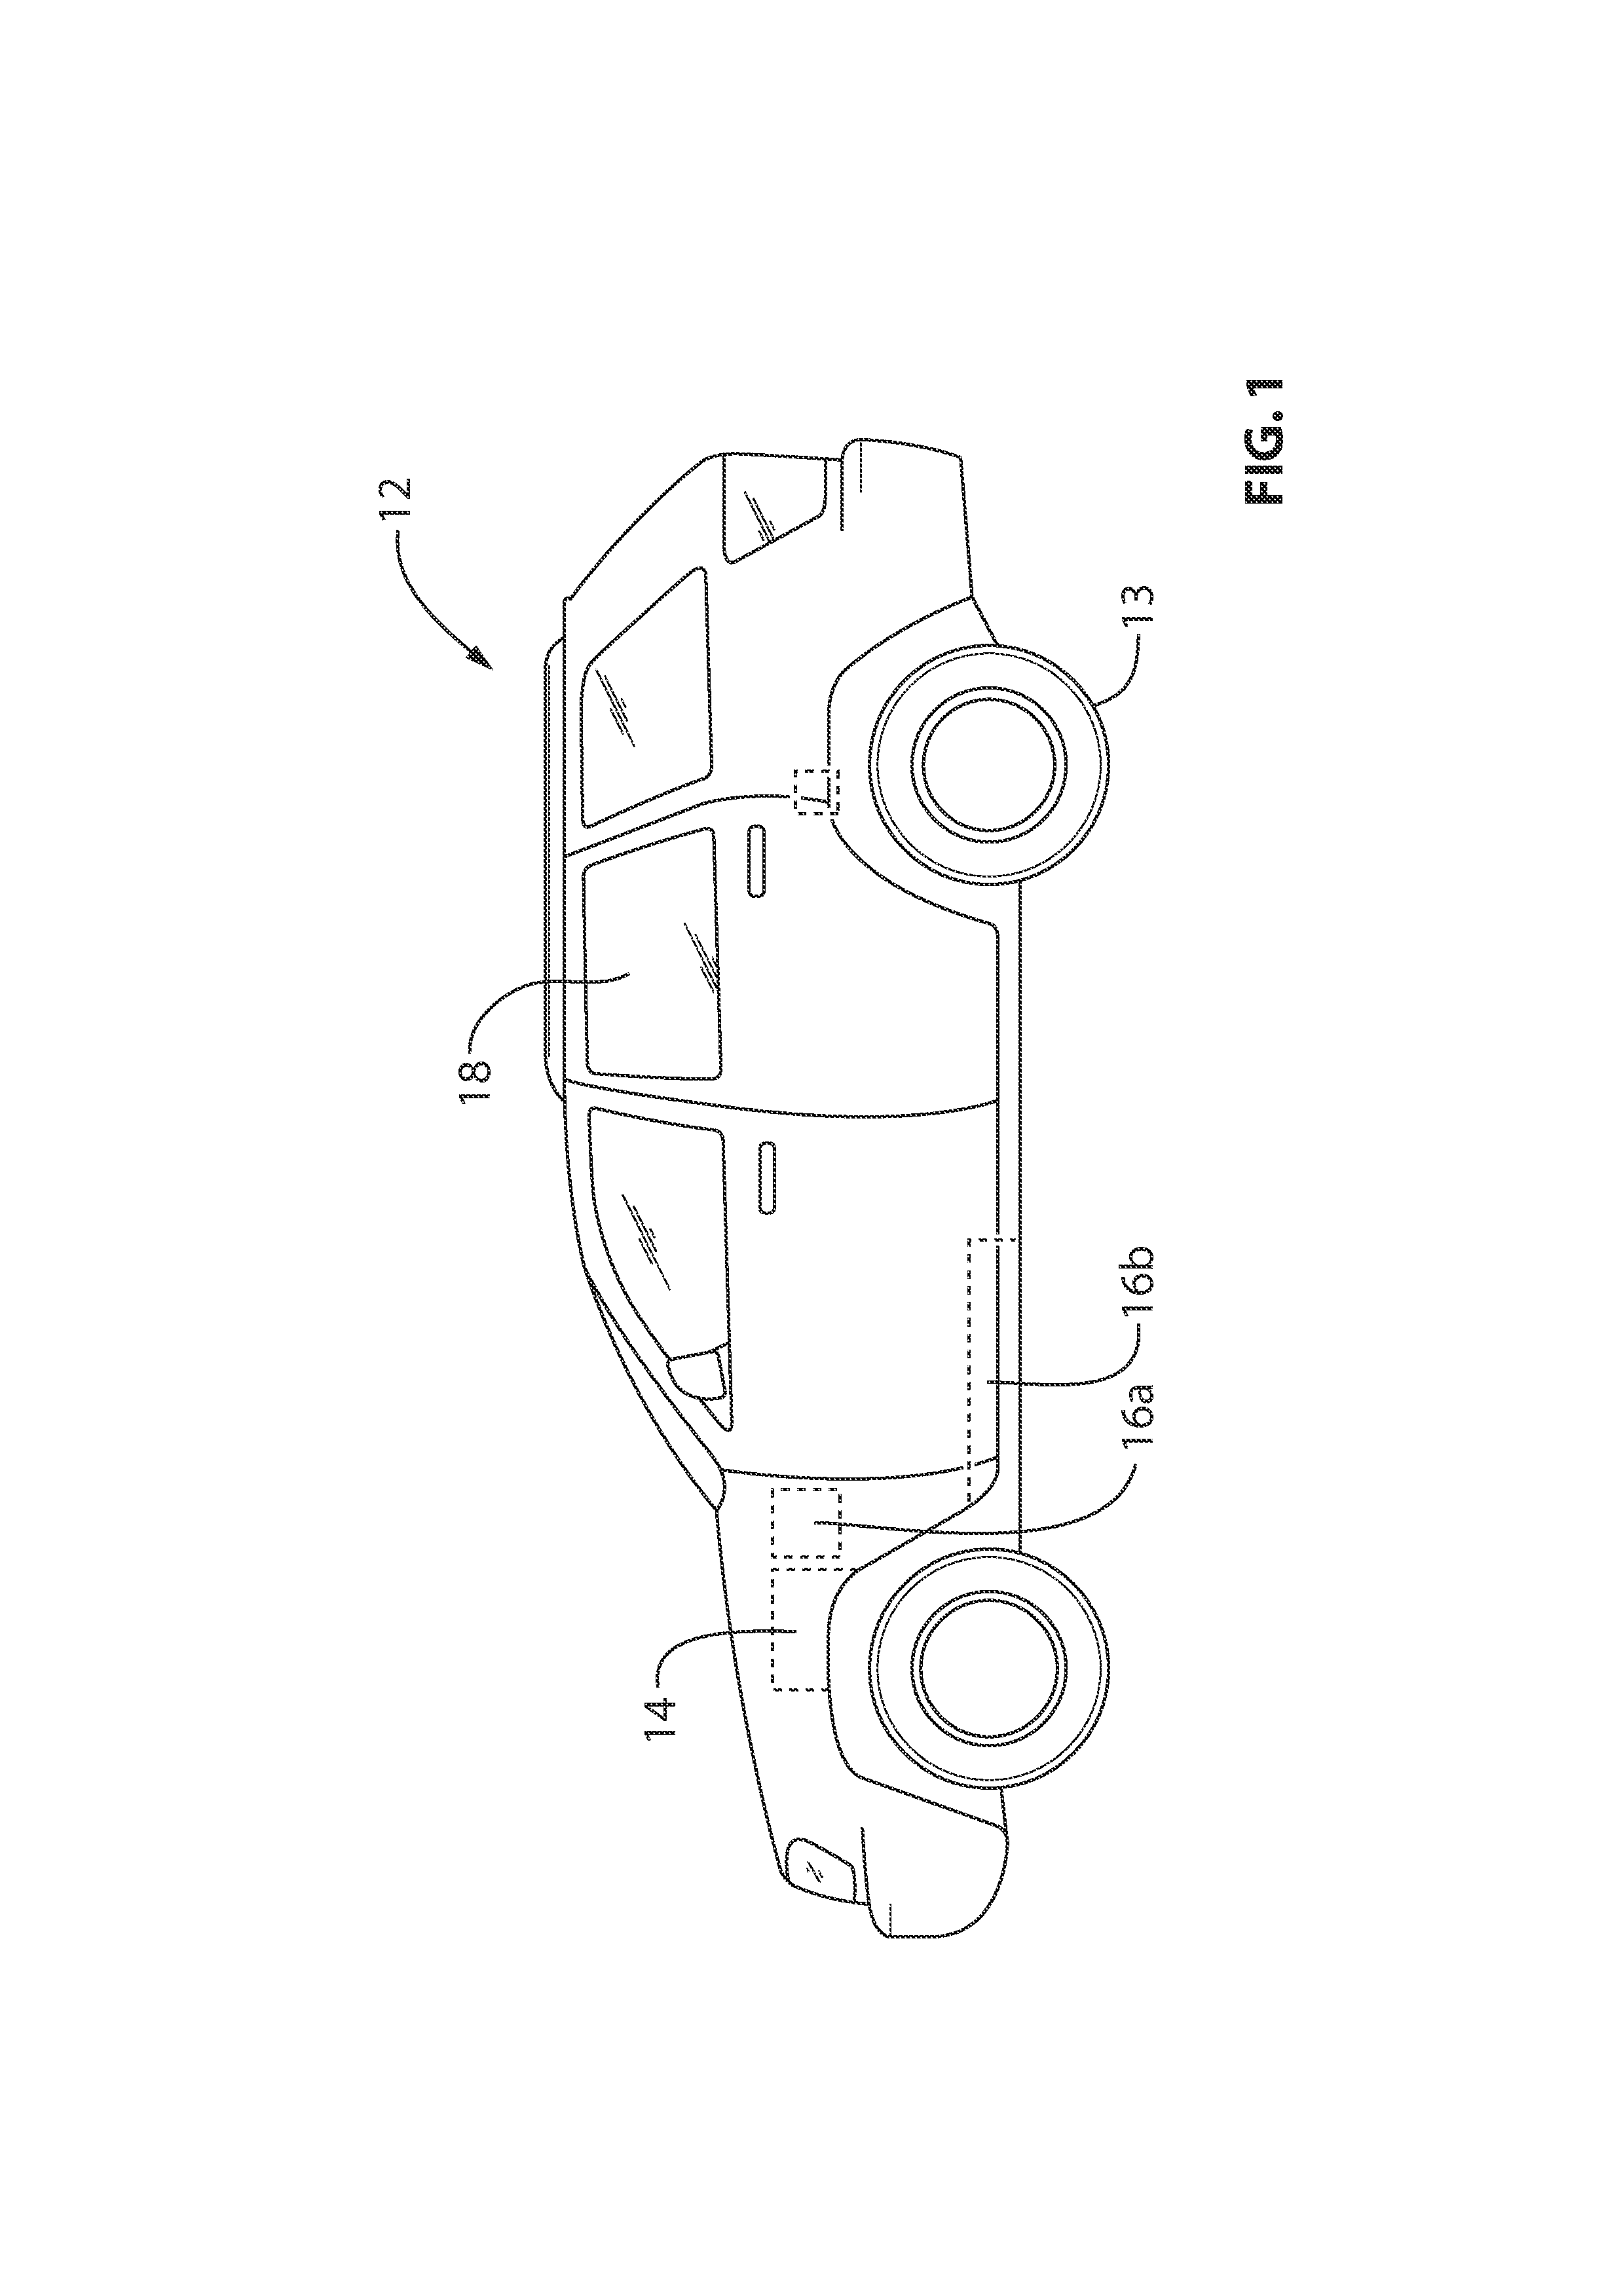 Thermal management system for battery electric vehicle